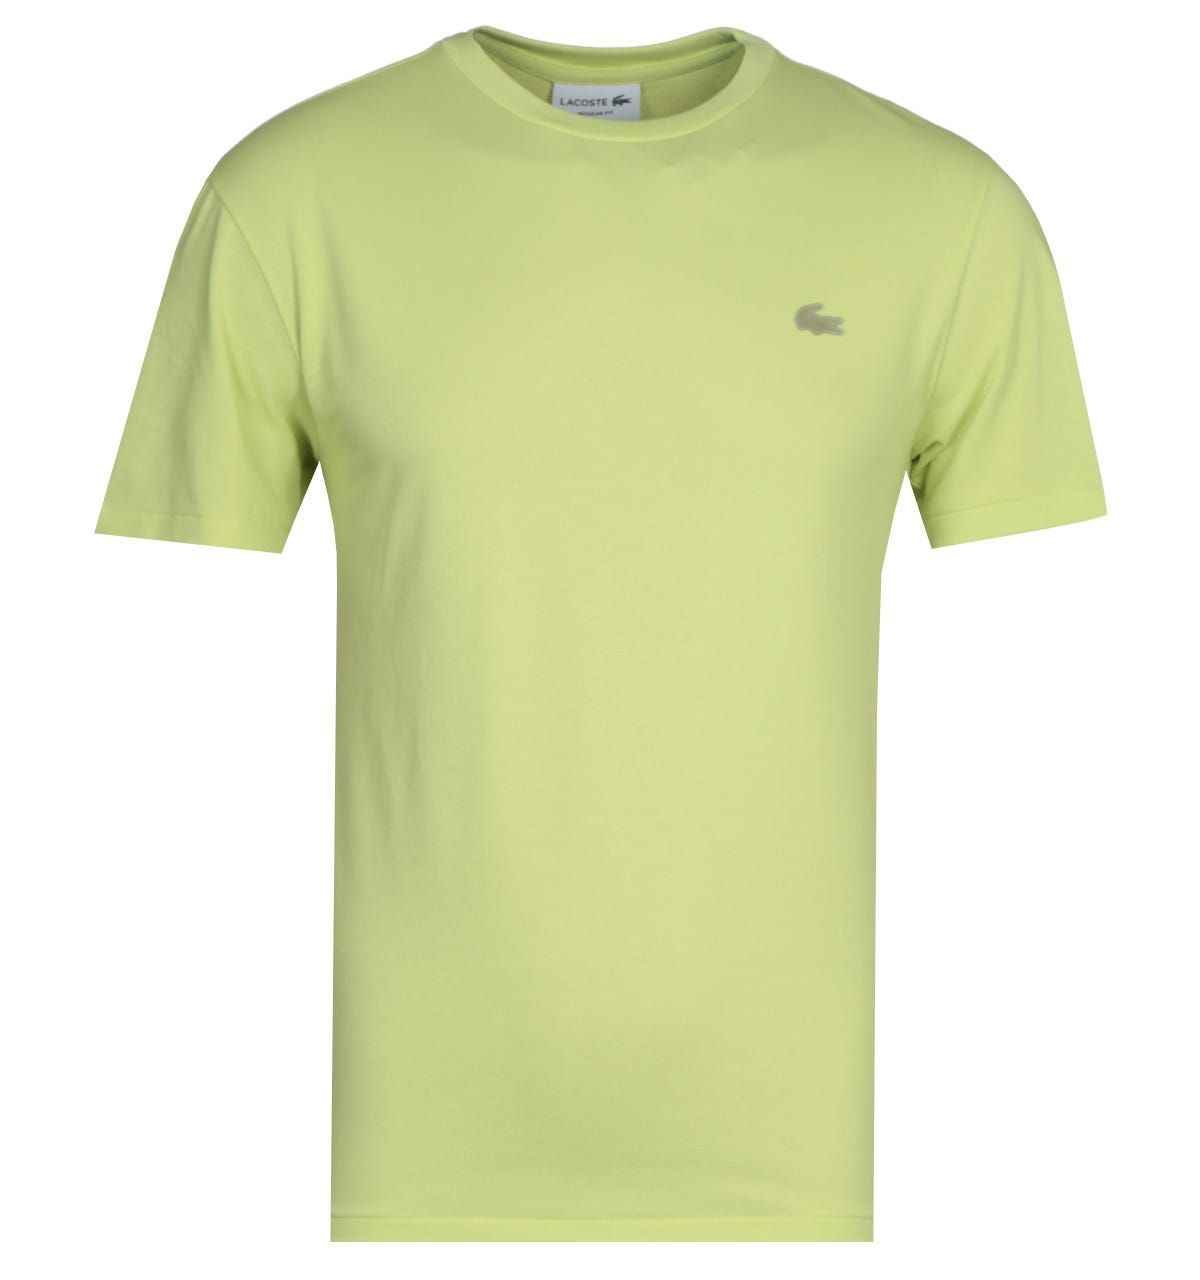 <p>A pure cotton composition crafted by Lacoste. The Lacoste Yellow Homme T-Shirt is fitted with a crew neck cut with ribbed trims. The design is finished with the Lacoste logo embroidered on the chest.</p><ul><li>Cotton composition</li><li>Crew neck</li><li>Tonal stitching</li><li>Ribbed trims</li><li>Lacoste logo embroidered on chest</li></ul><p>Style & Fit:</p><ul><li>Regular fit</li><li>Fits true to size</li></ul><p>Fabric Composition & Care:</p><ul><li>63% Cotton 31% Polyester 6% Elastane</li><li>Machine washable</li></ul>